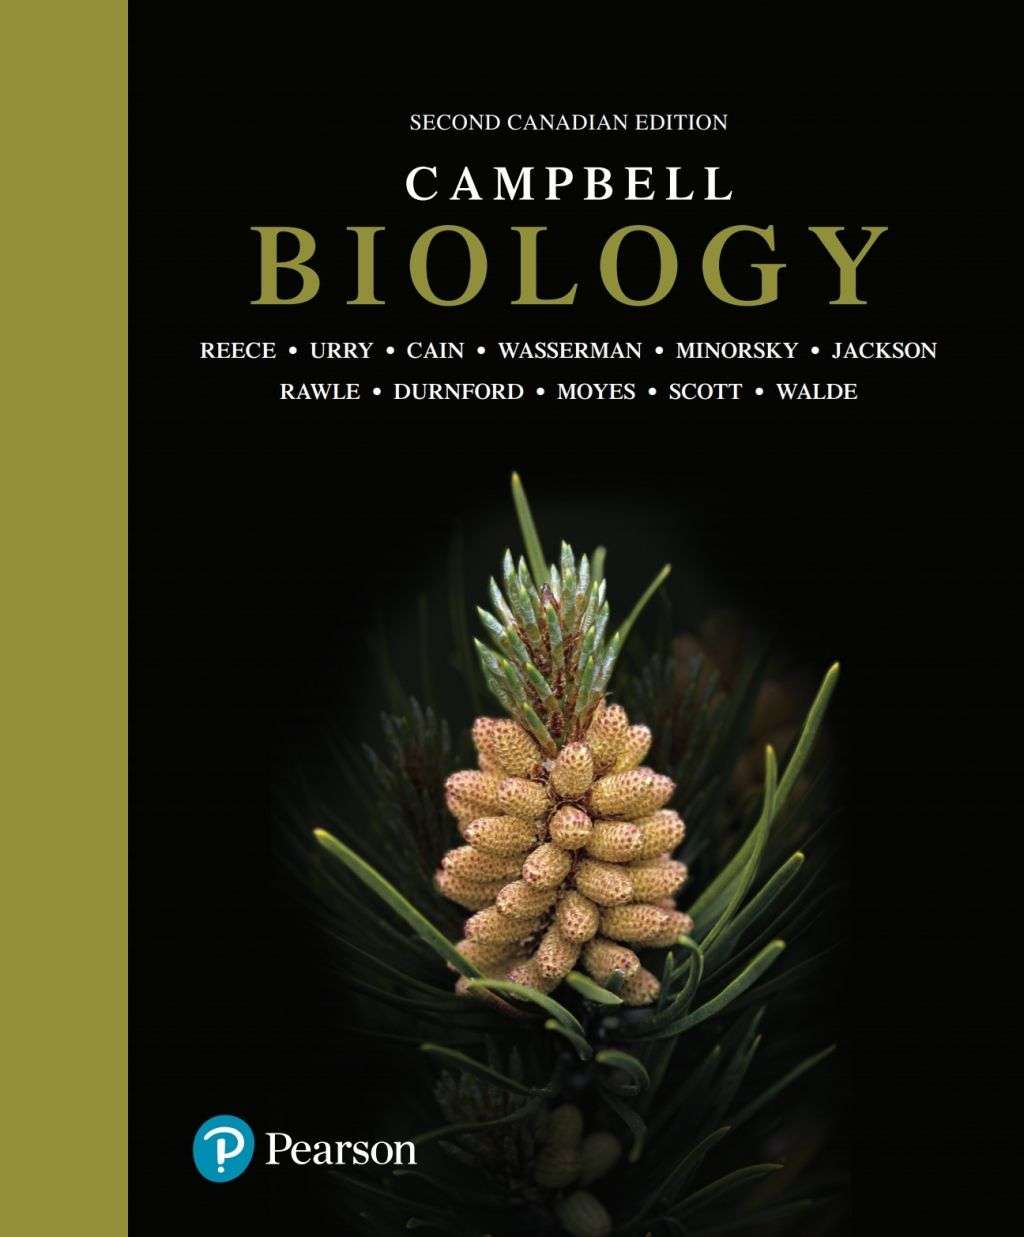 Campbell Biology Second Canadian Edition (eBook Rental)